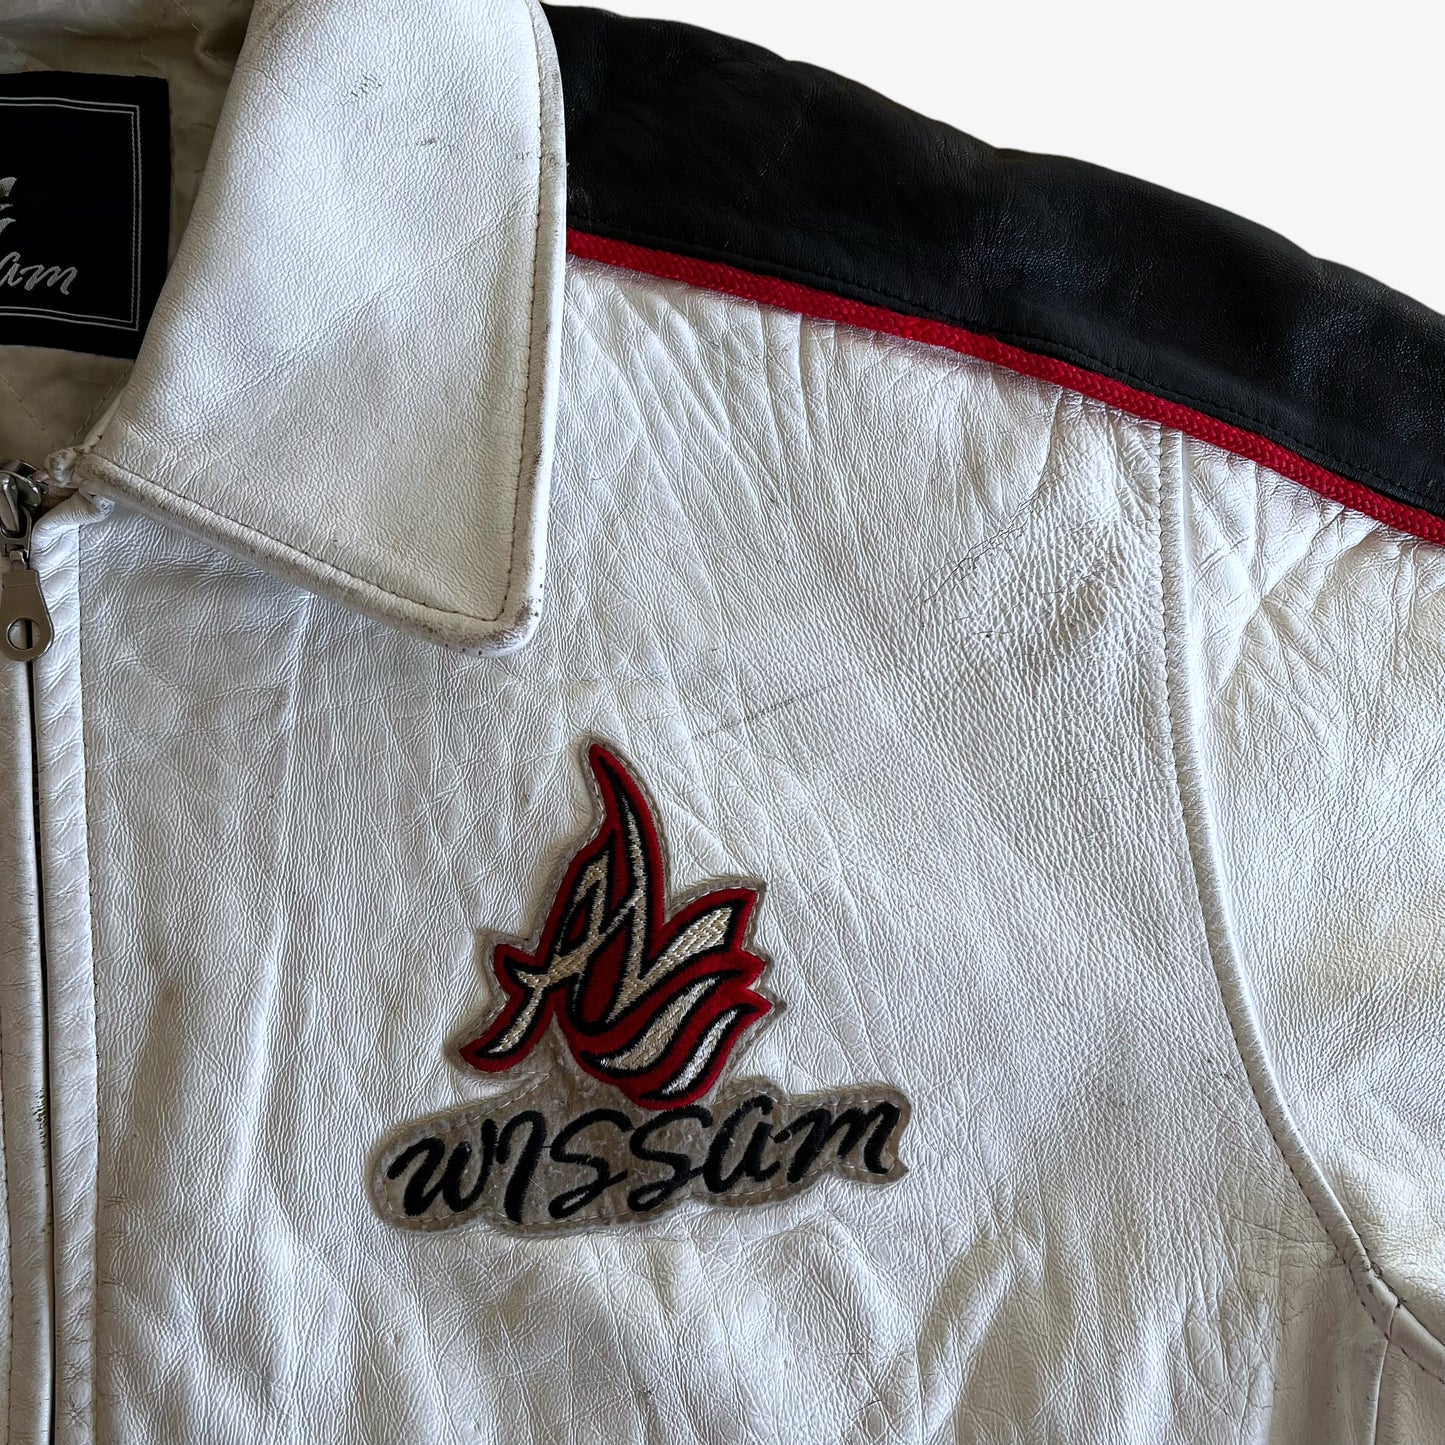 Vintage 90s AL Wissam White Leather Varsity Jacket With Back Spell Out Badge - Casspios Dream